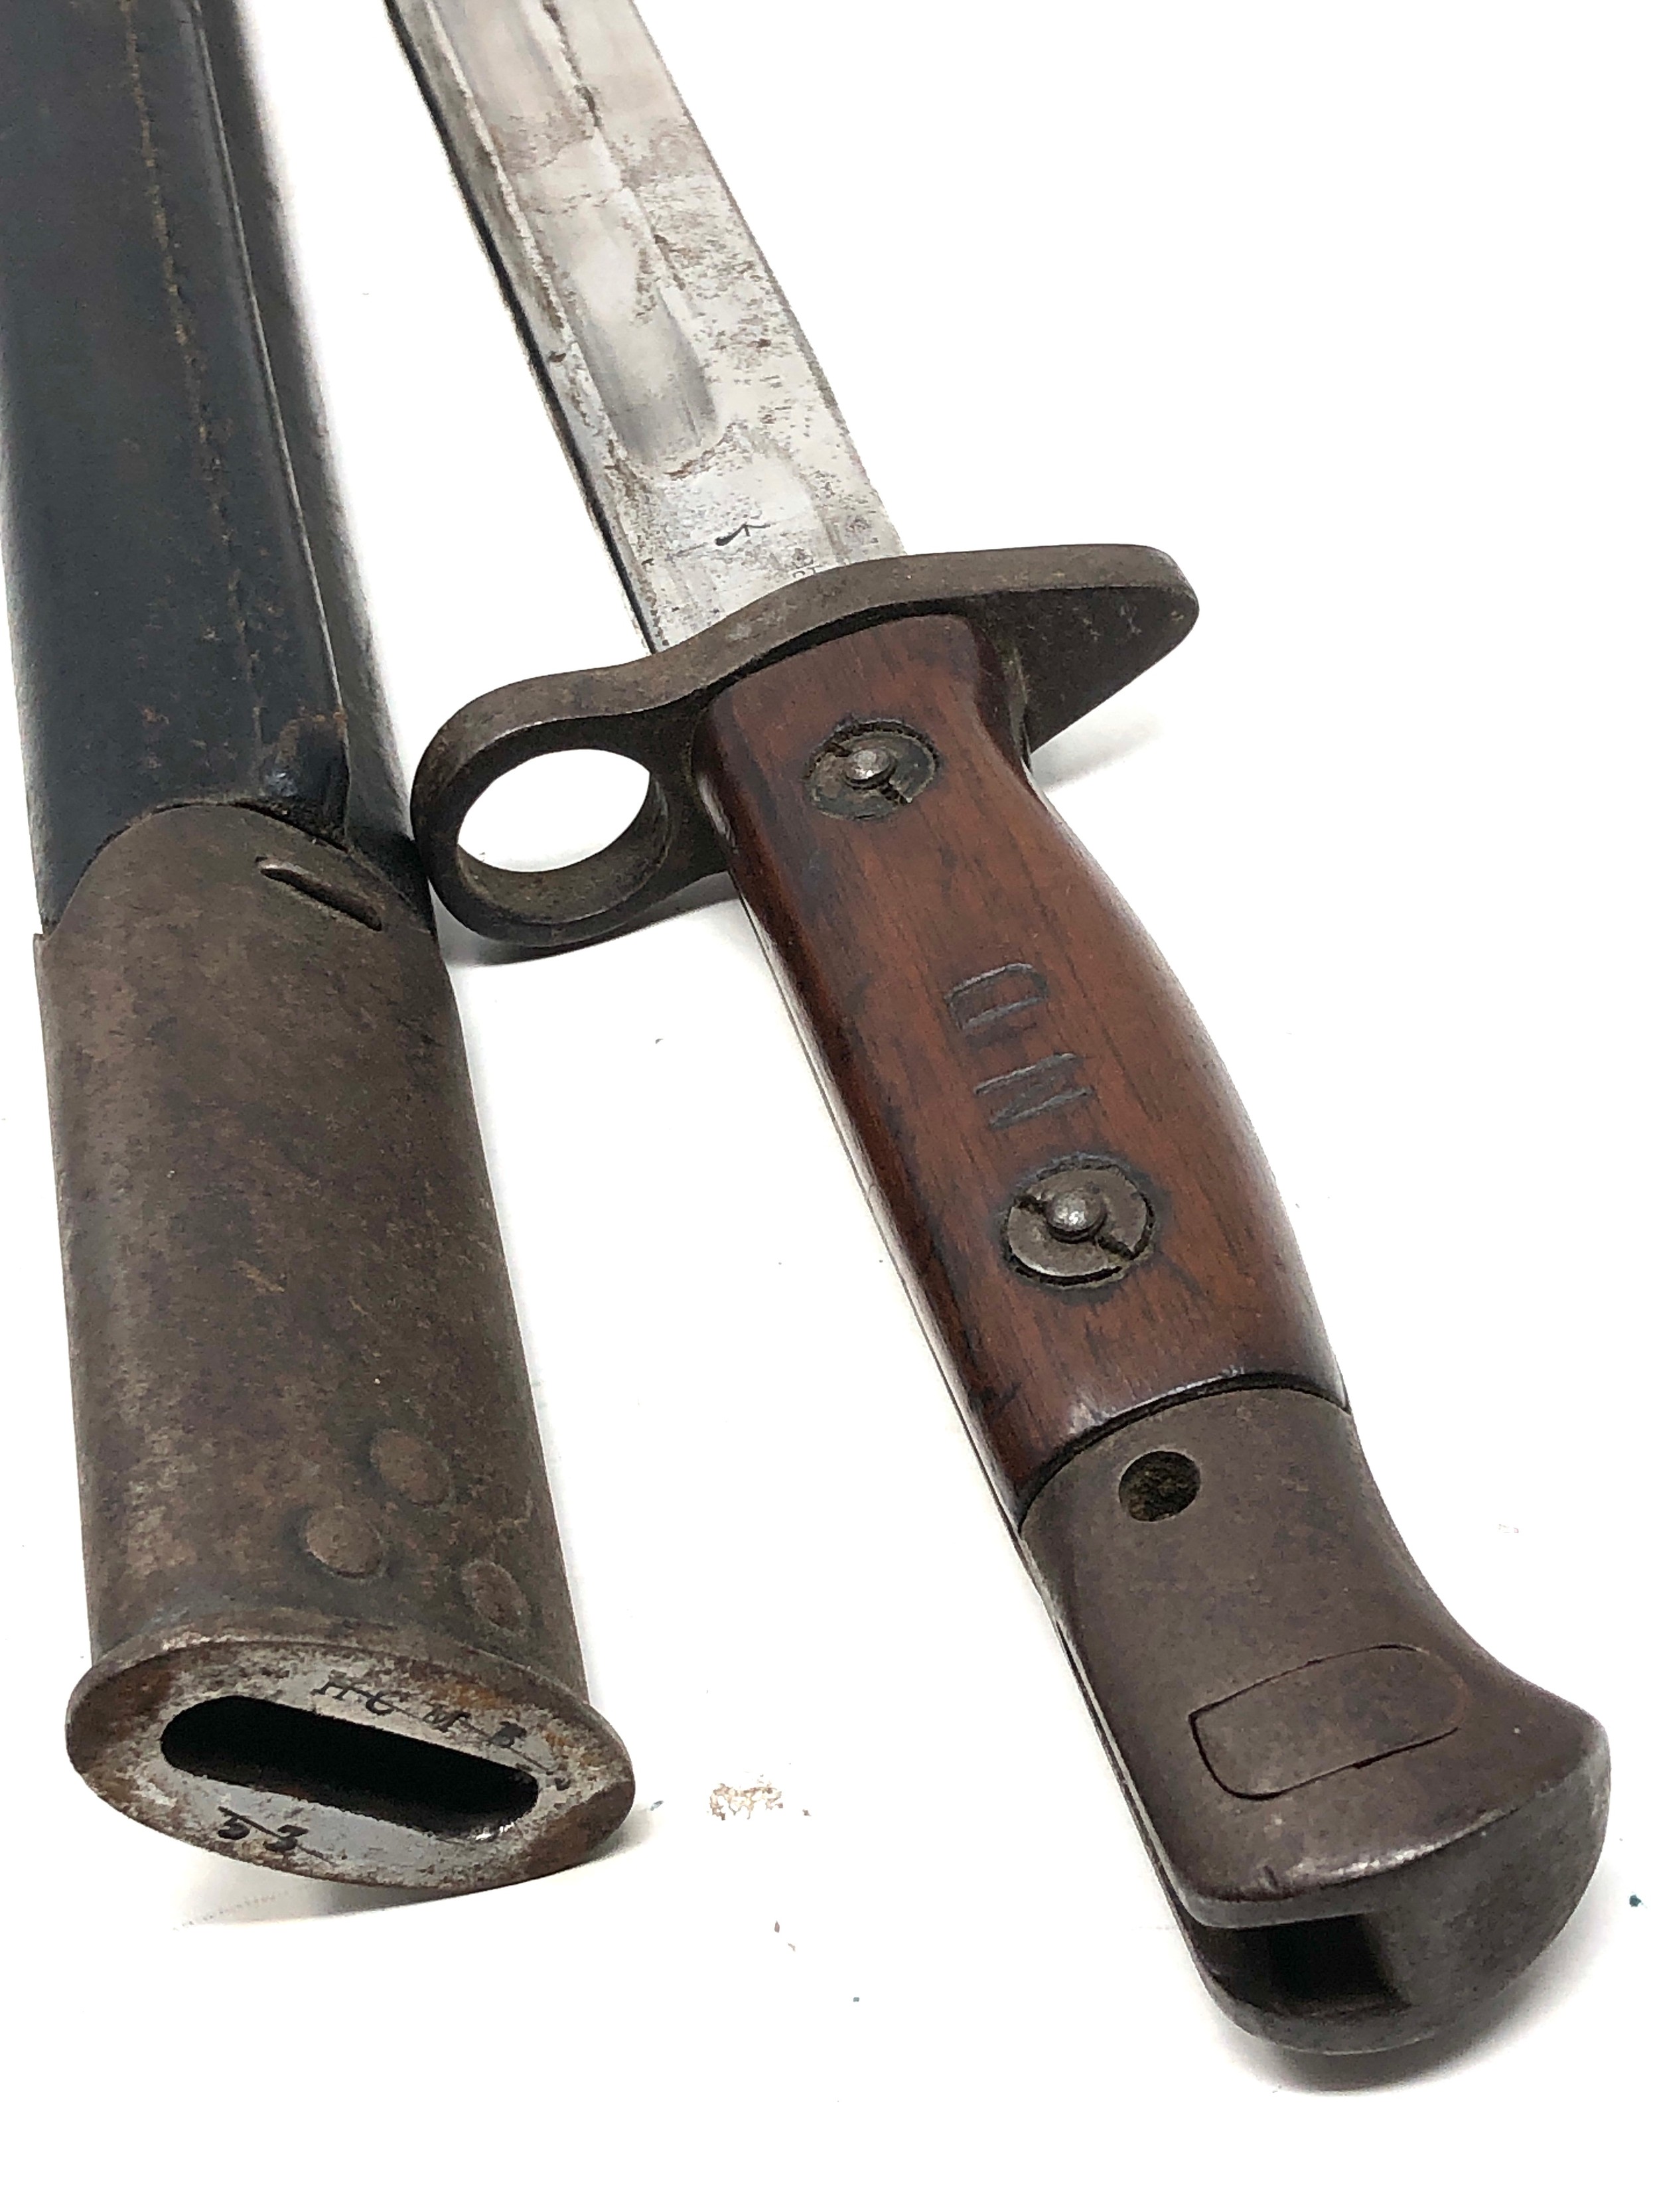 1907 sanderson bayonet and scabbard - Image 6 of 6